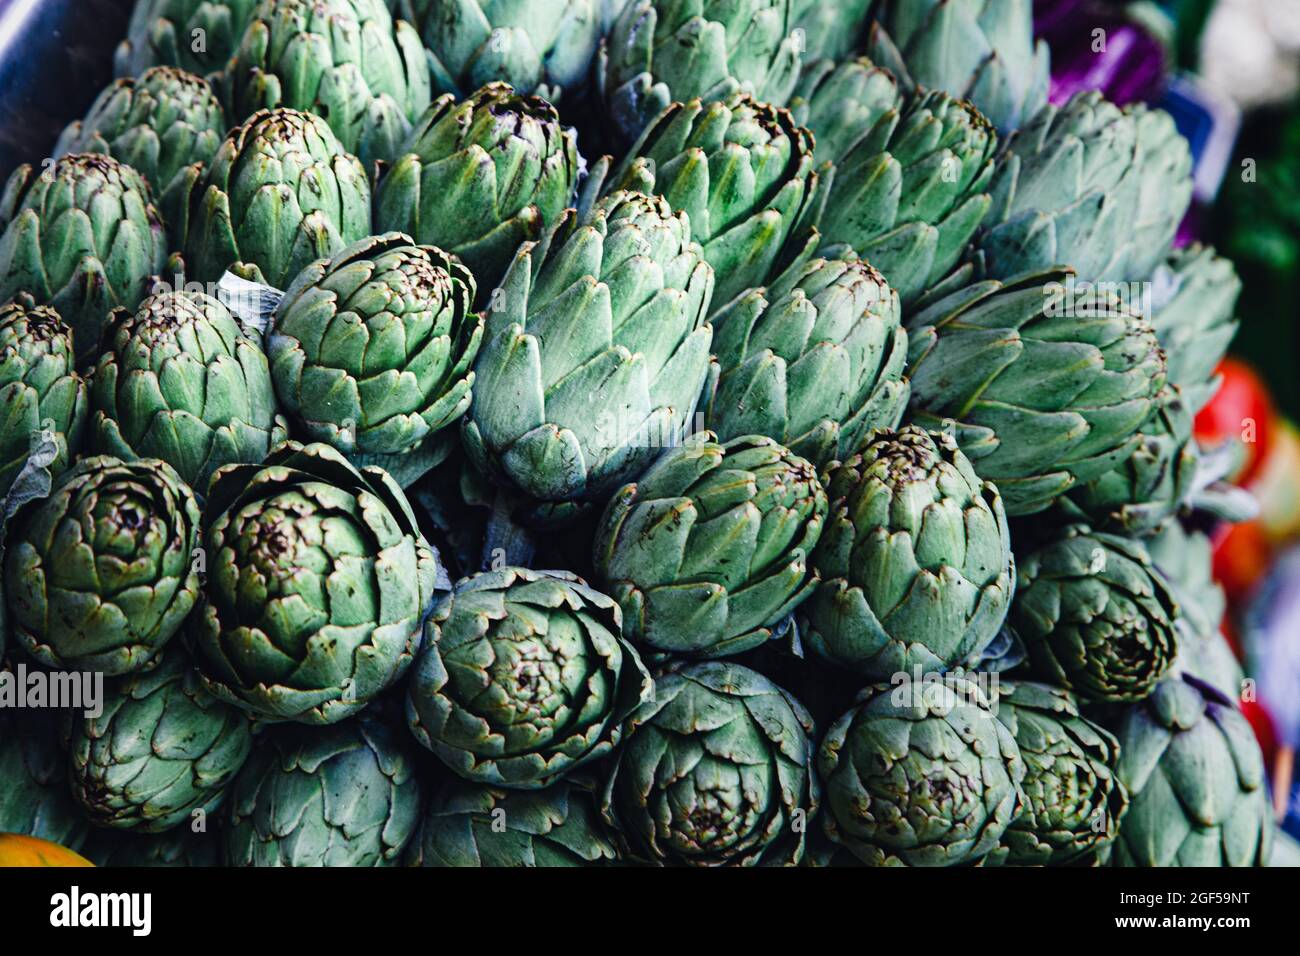 fresh green Globe or French Artichokes piled and ready at the market. Cynara Cardunculus var. Scolymus. Stock Photo